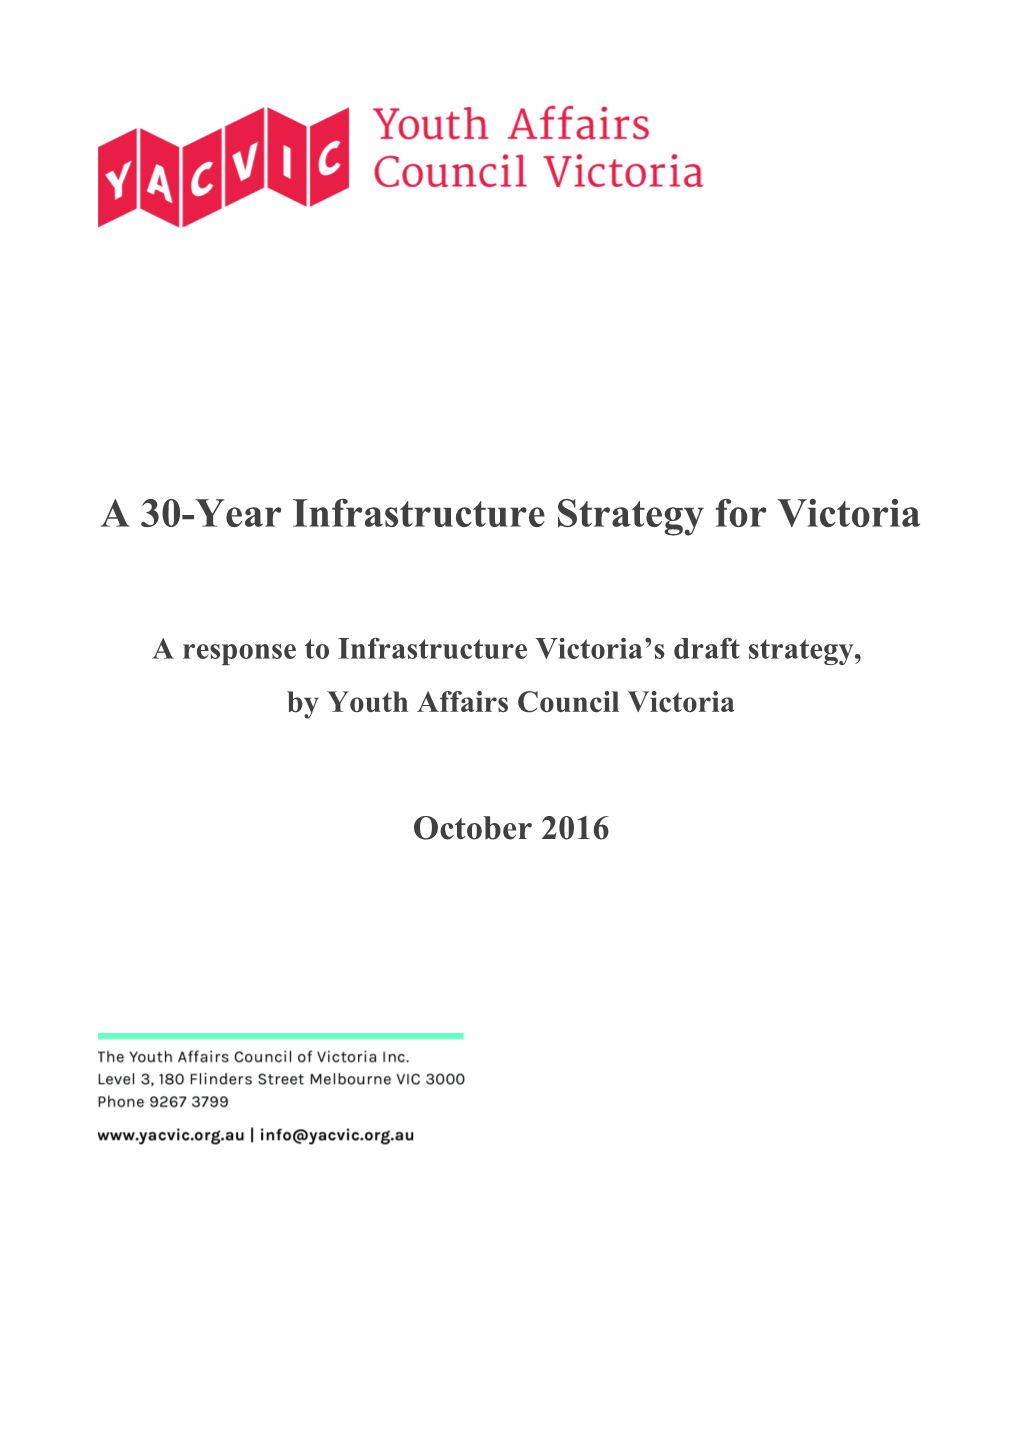 A 30-Year Infrastructure Strategy for Victoria